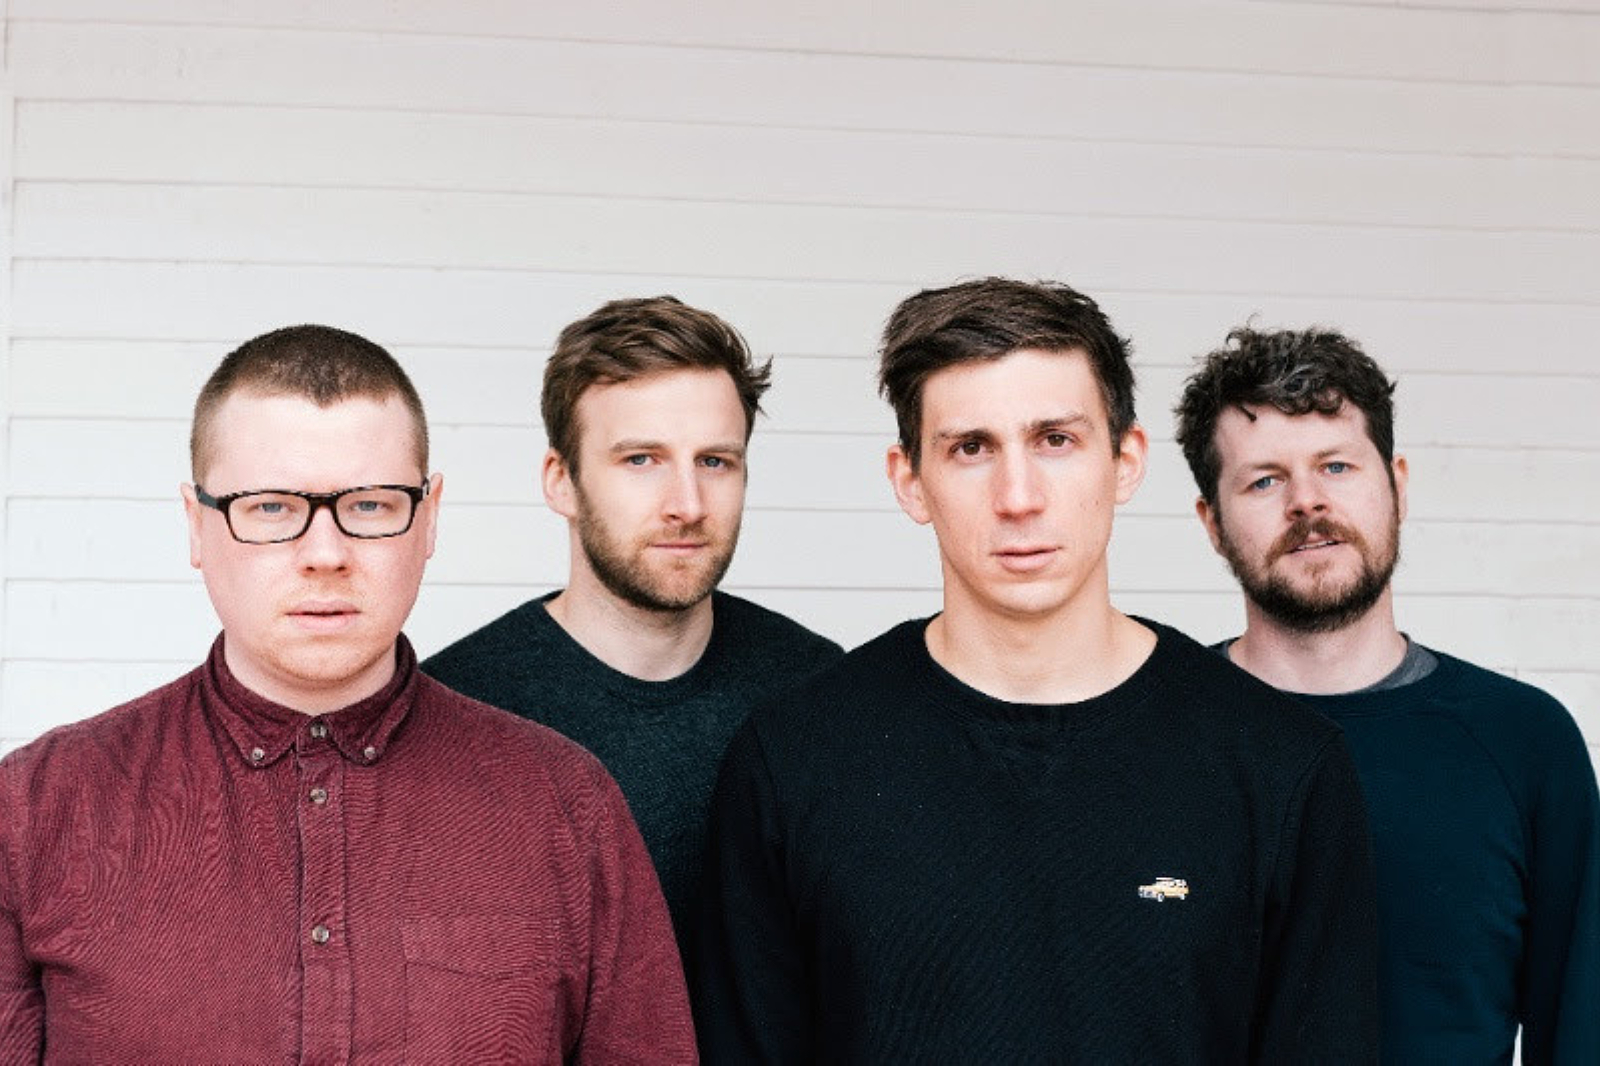 We Were Promised Jetpacks announce new album 'The More I Sleep The Less I Dream', share first track 'Hanging In'